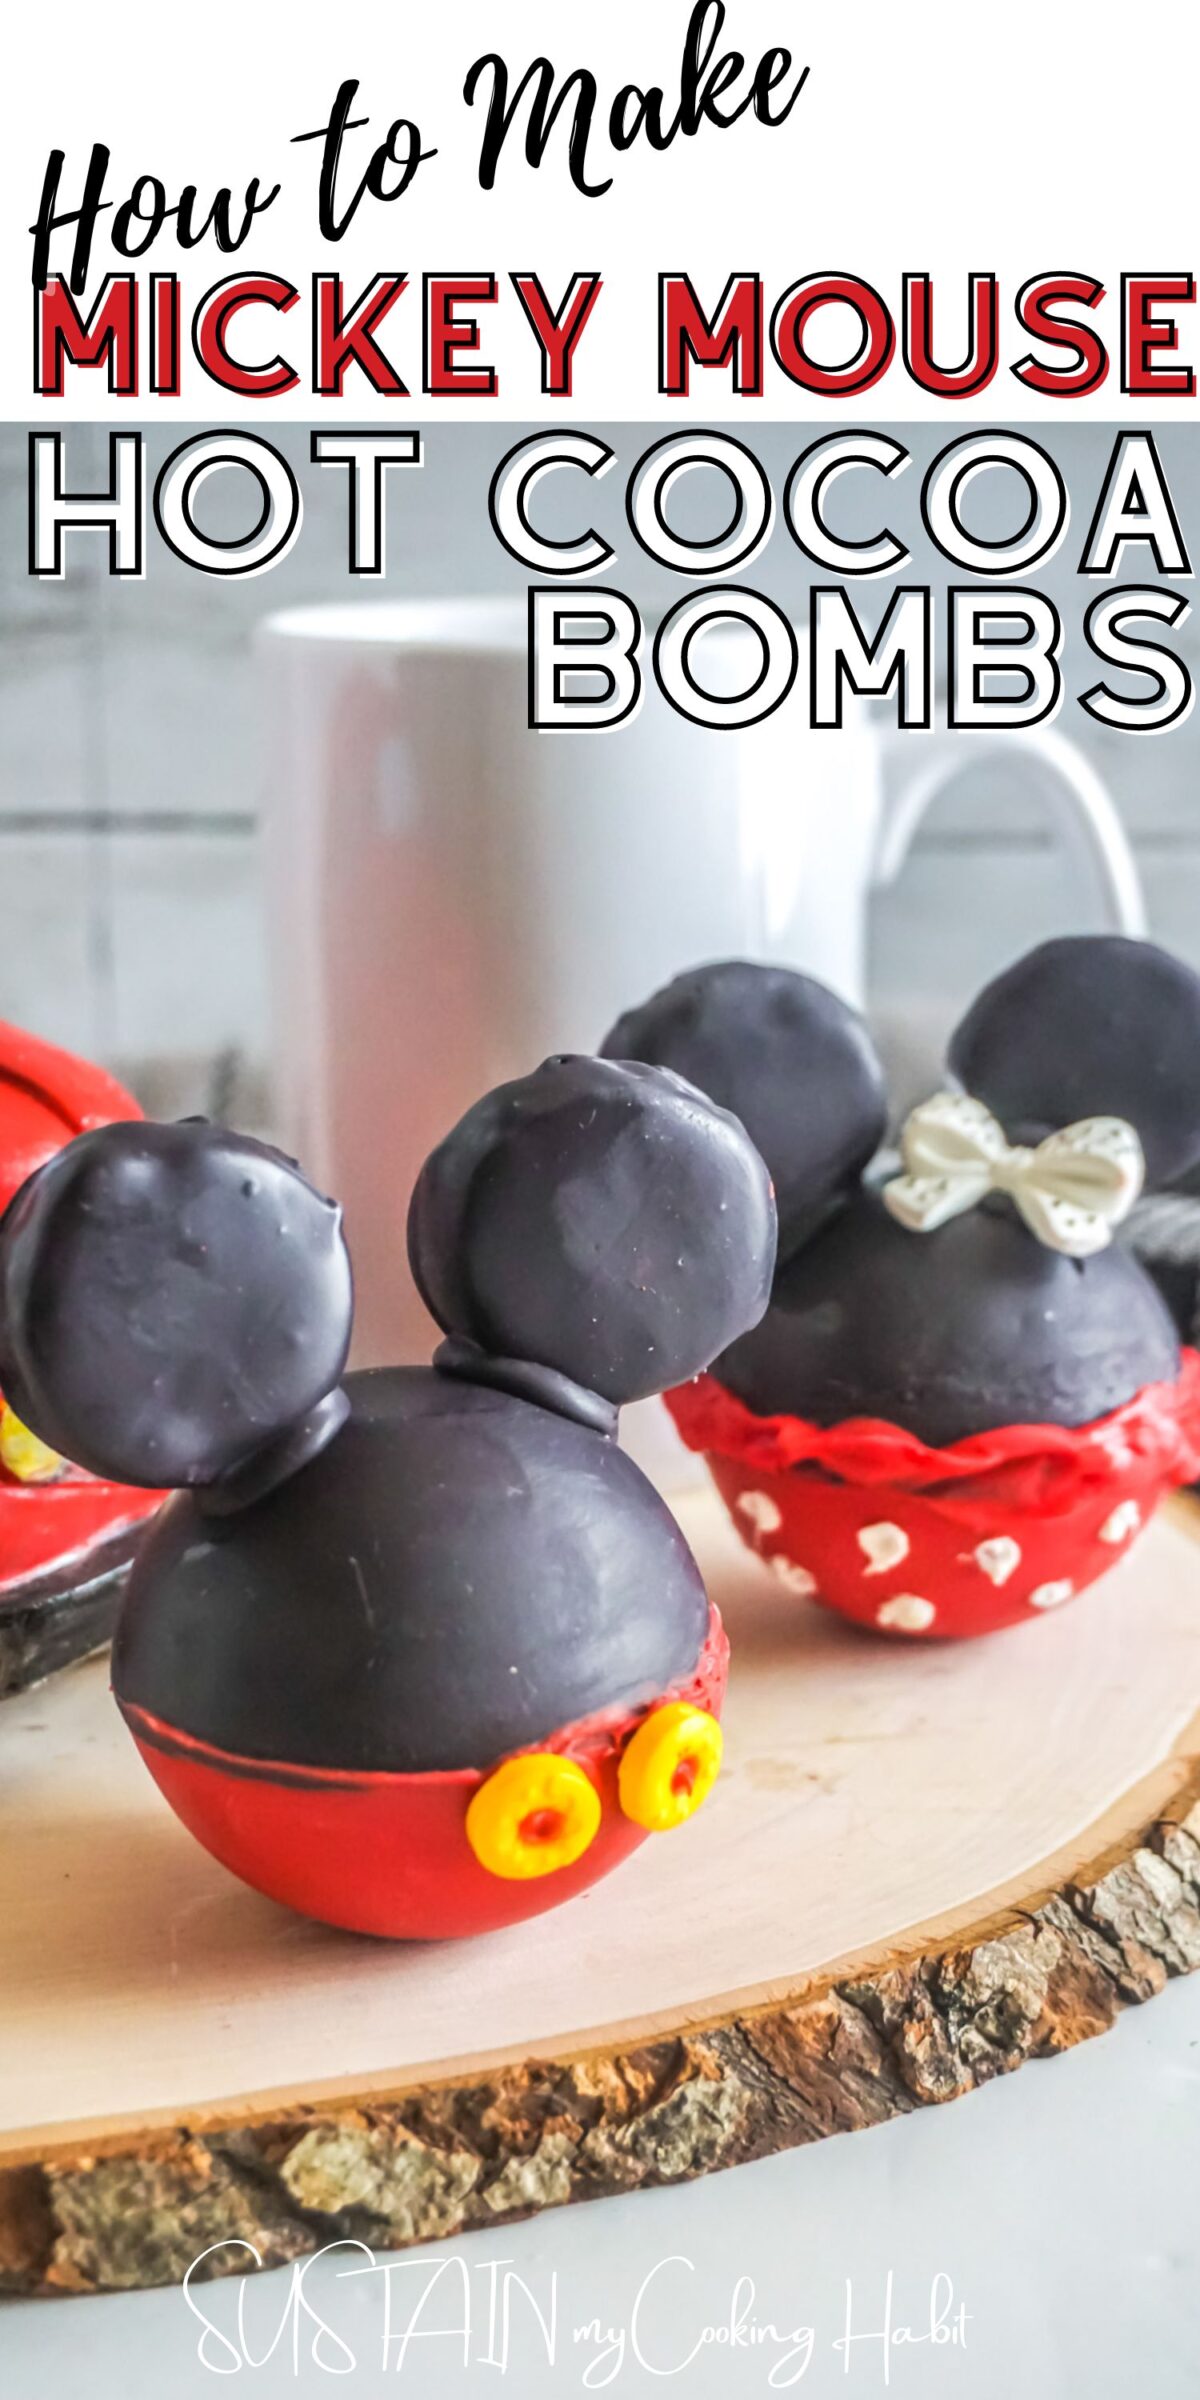 Mickey Mouse hot cocoa bombs with text overlay.